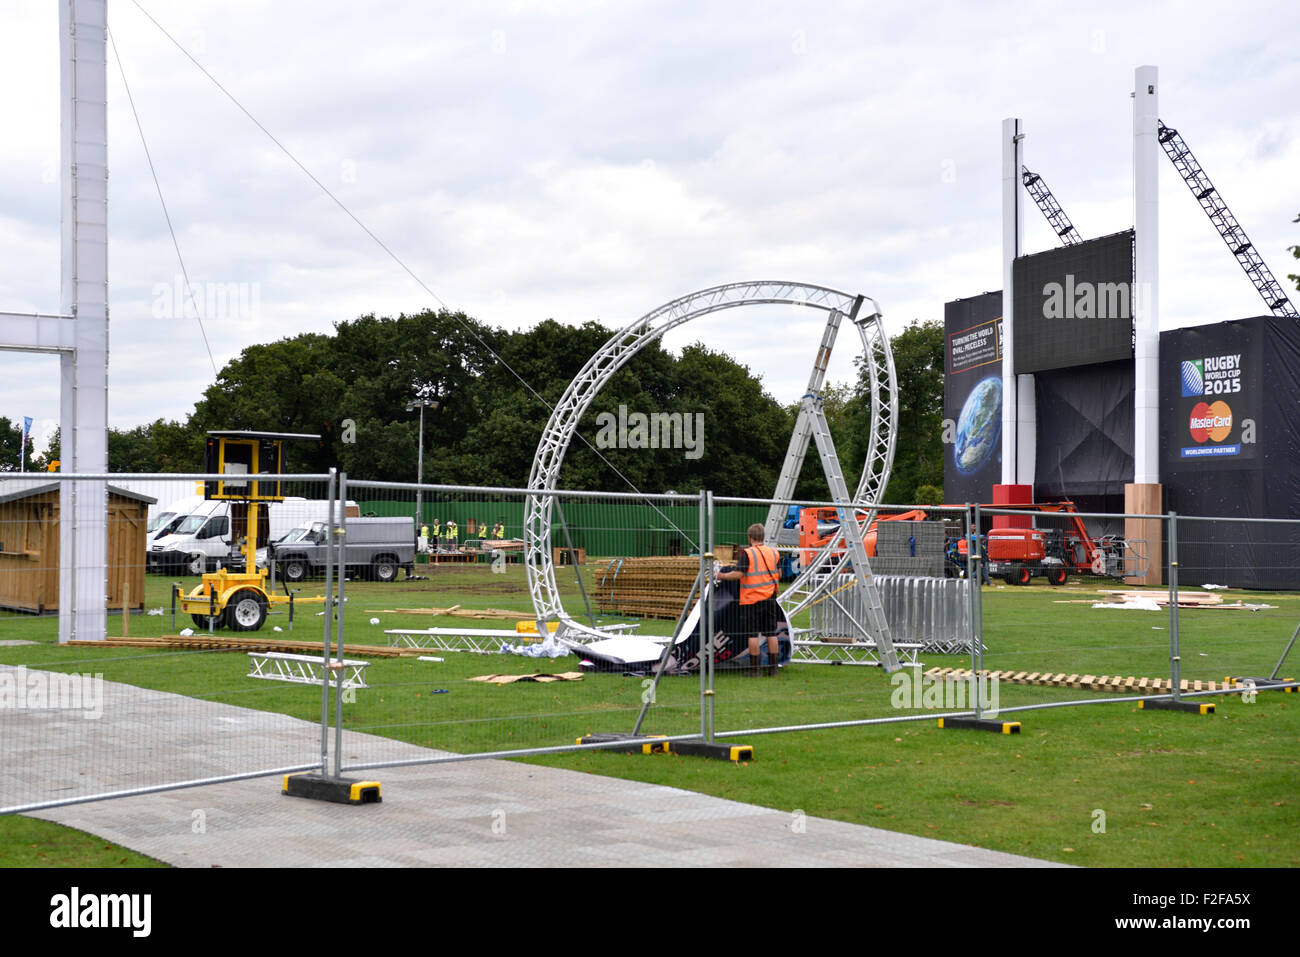 England Twickenham Rugby World Cup 2014 Fanzone Old Deer Park construction Stock Photo